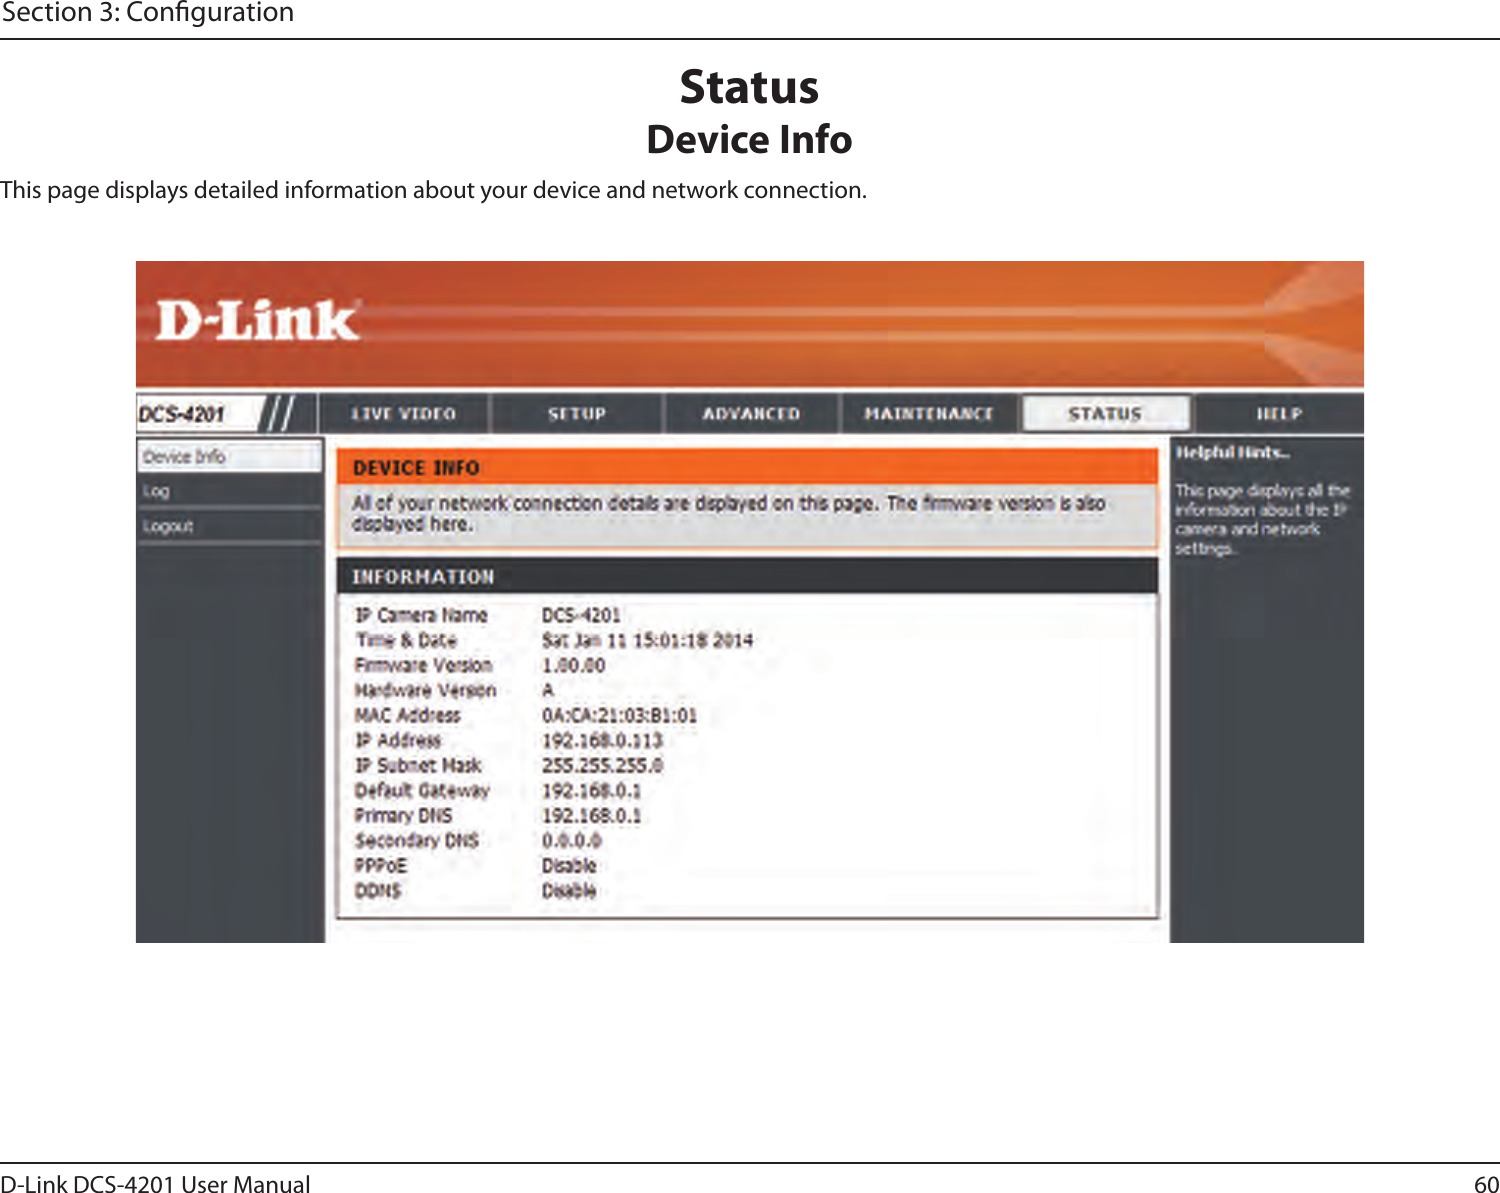 60D-Link DCS-4201 User ManualSection 3: CongurationStatusDevice InfoThis page displays detailed information about your device and network connection.